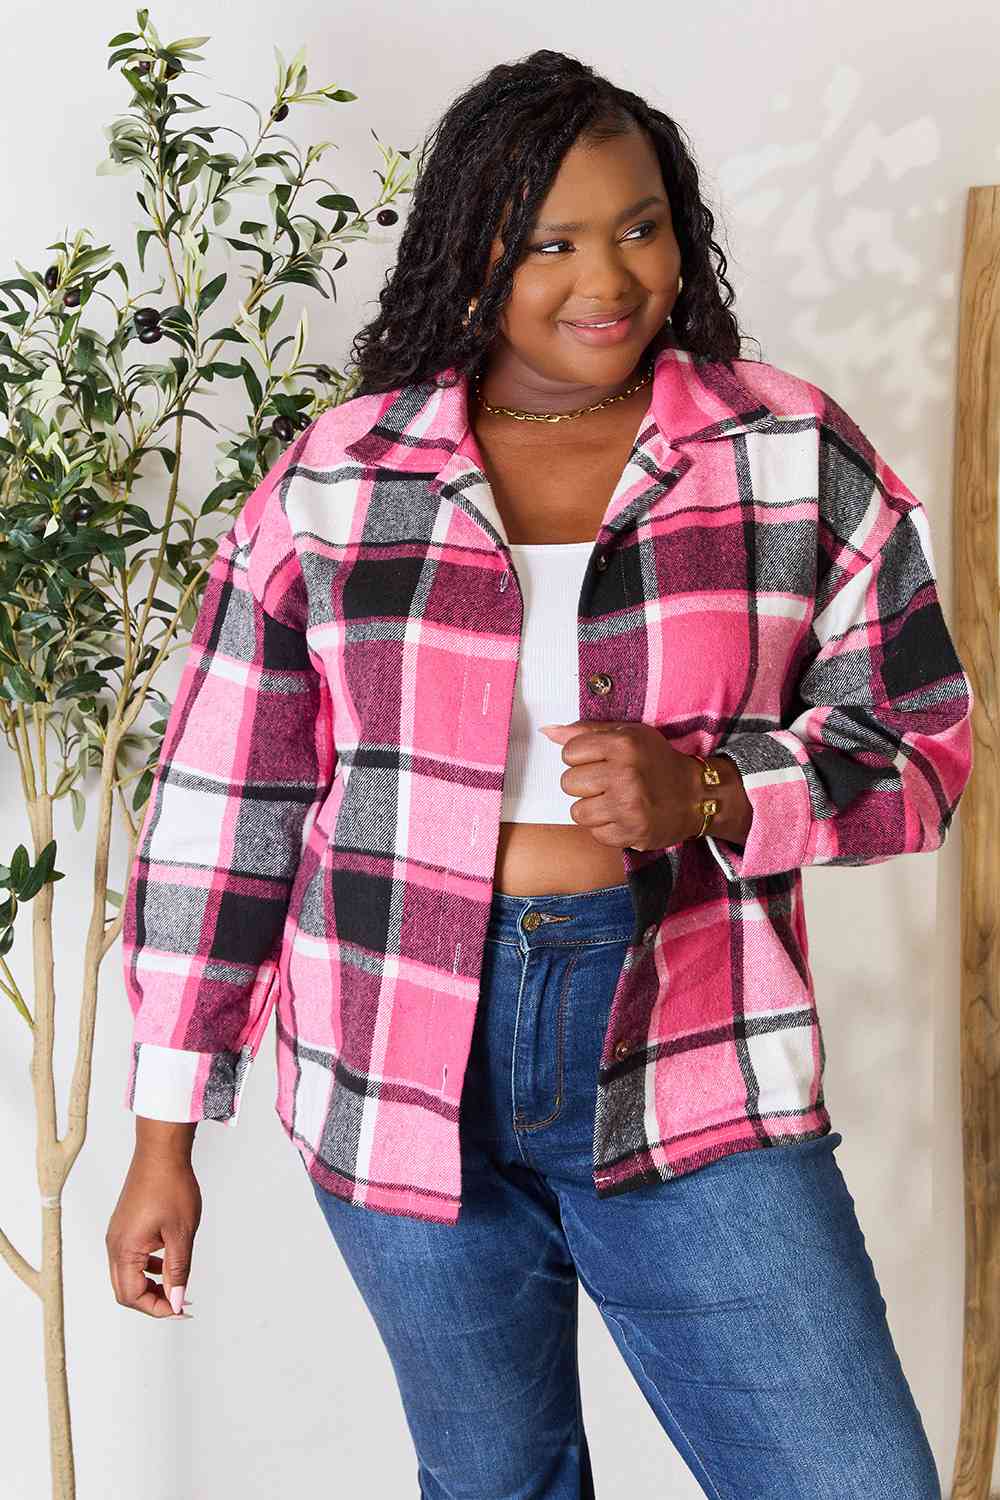 Plaid Button Up Collared Neck Jacket